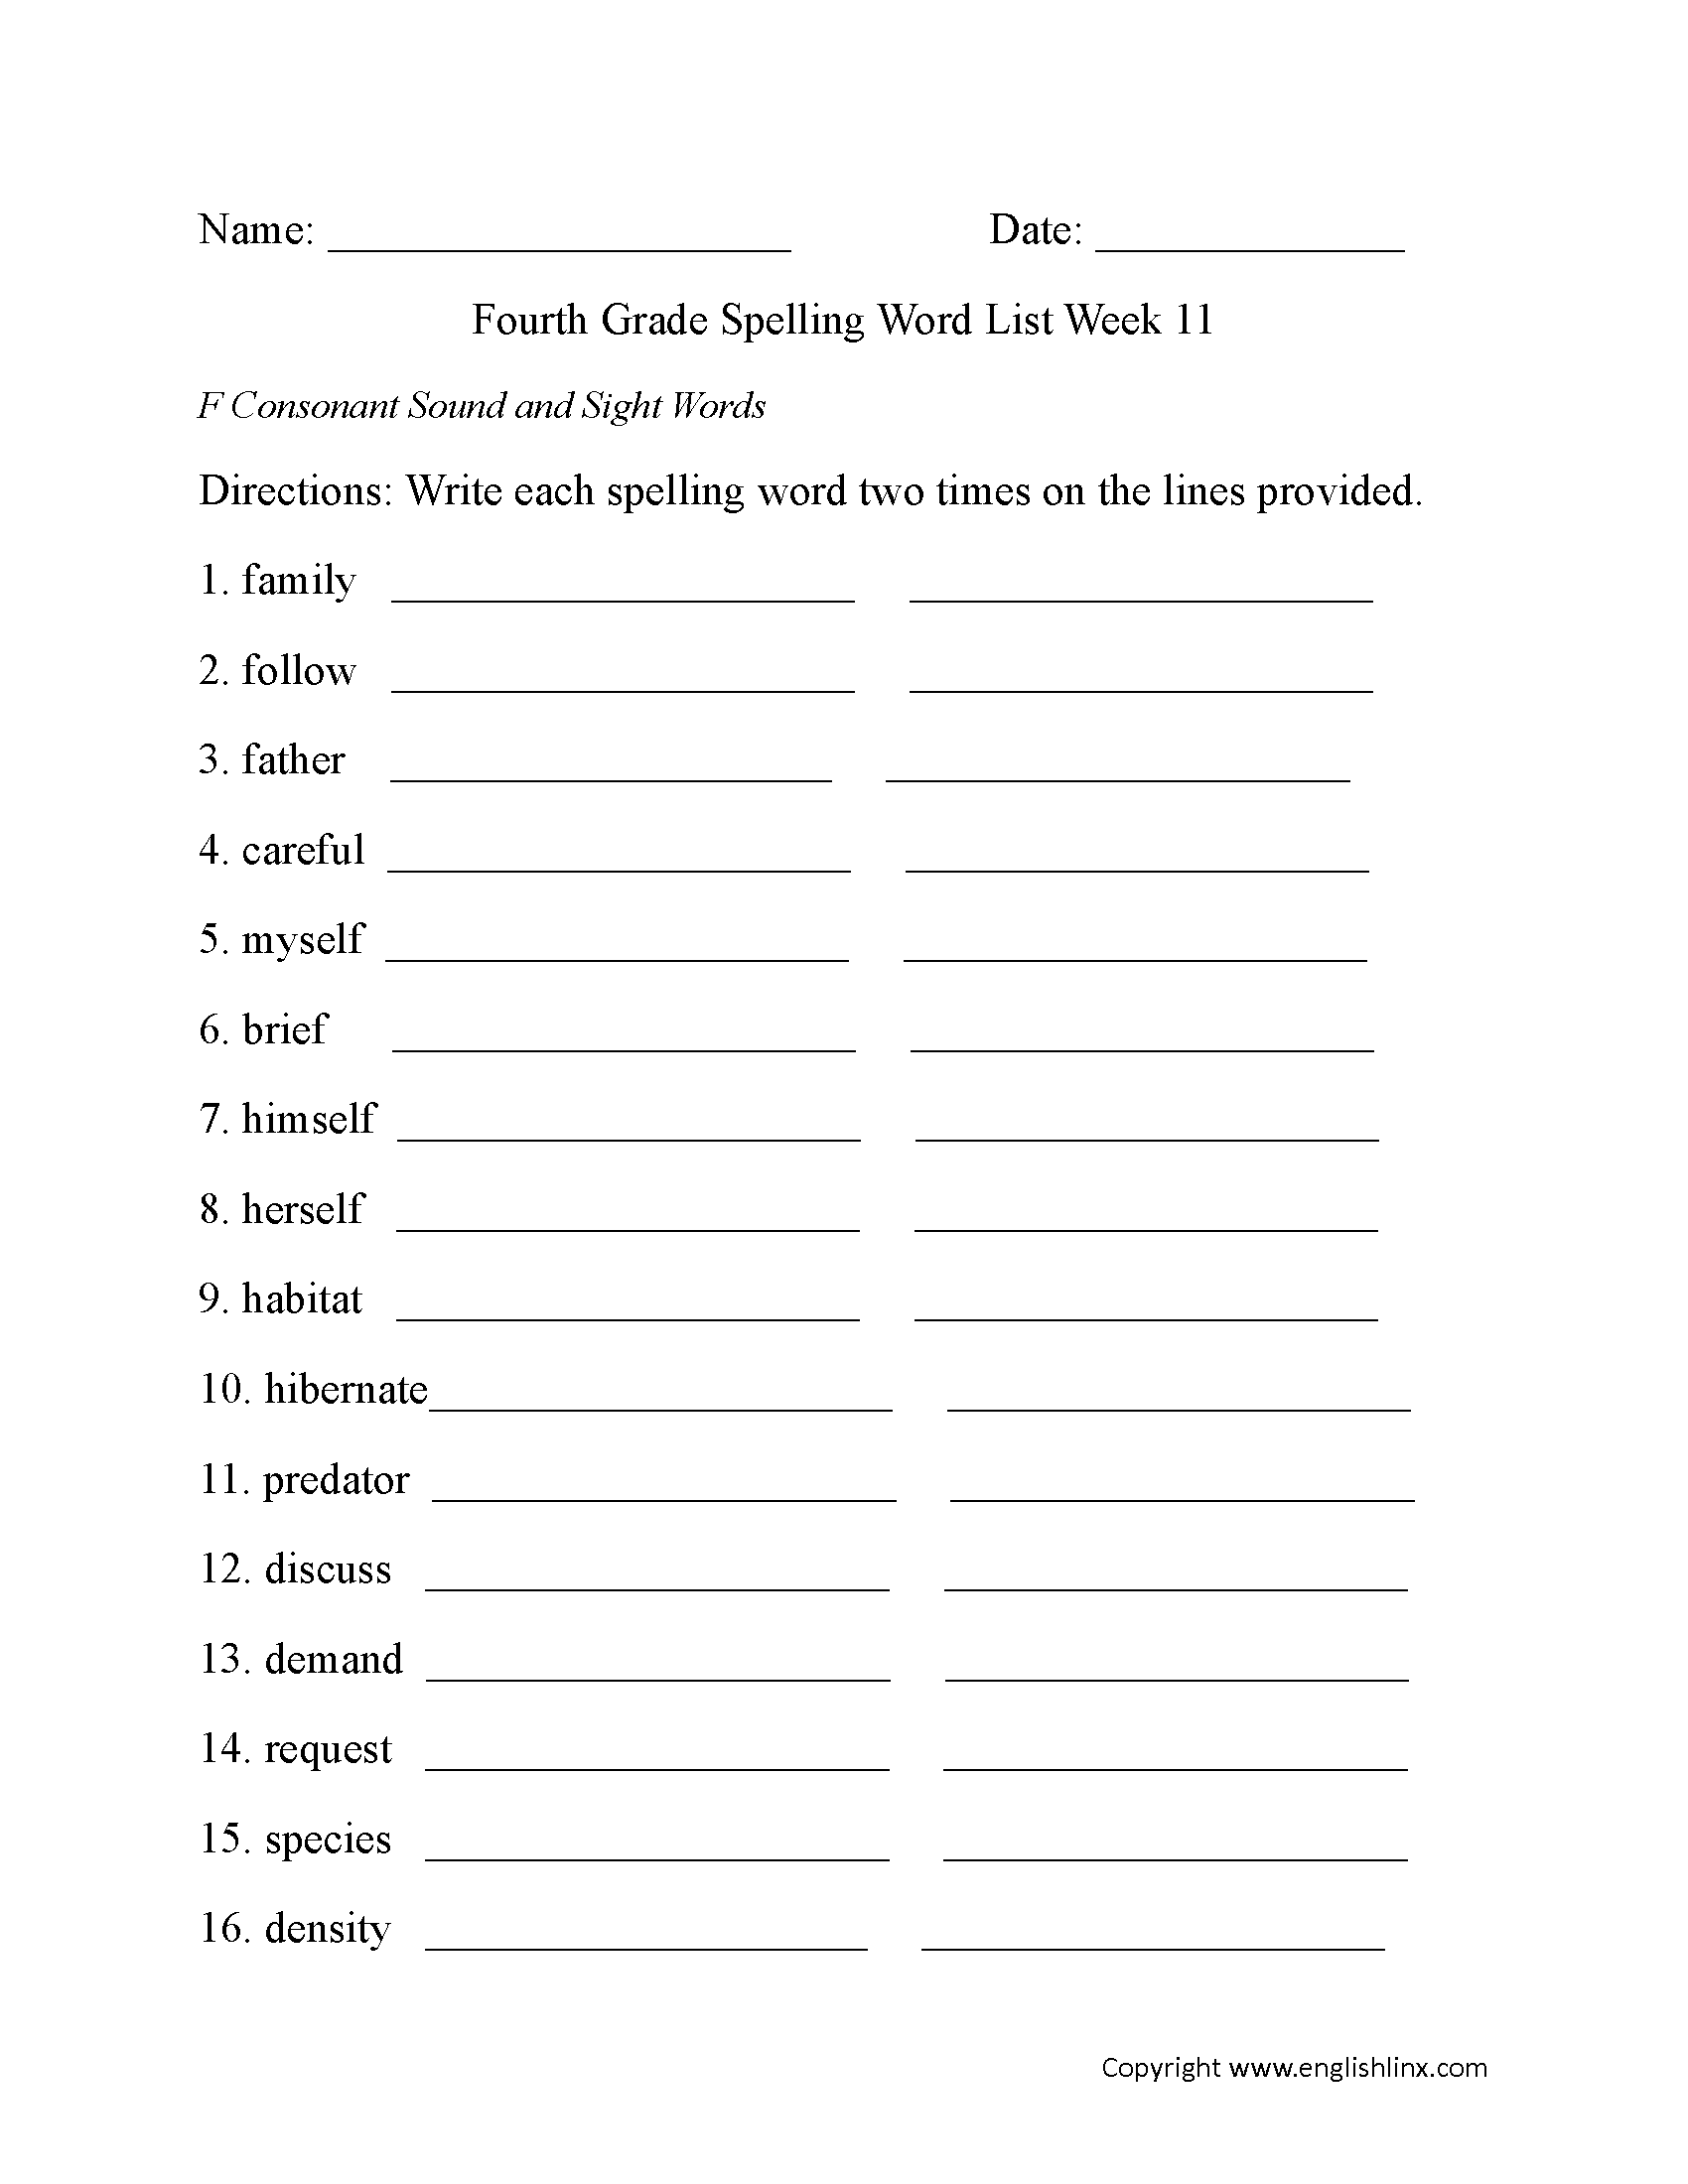 Week 11 F Consonant and Sight Words Fourth Grade Spelling Words Worksheets